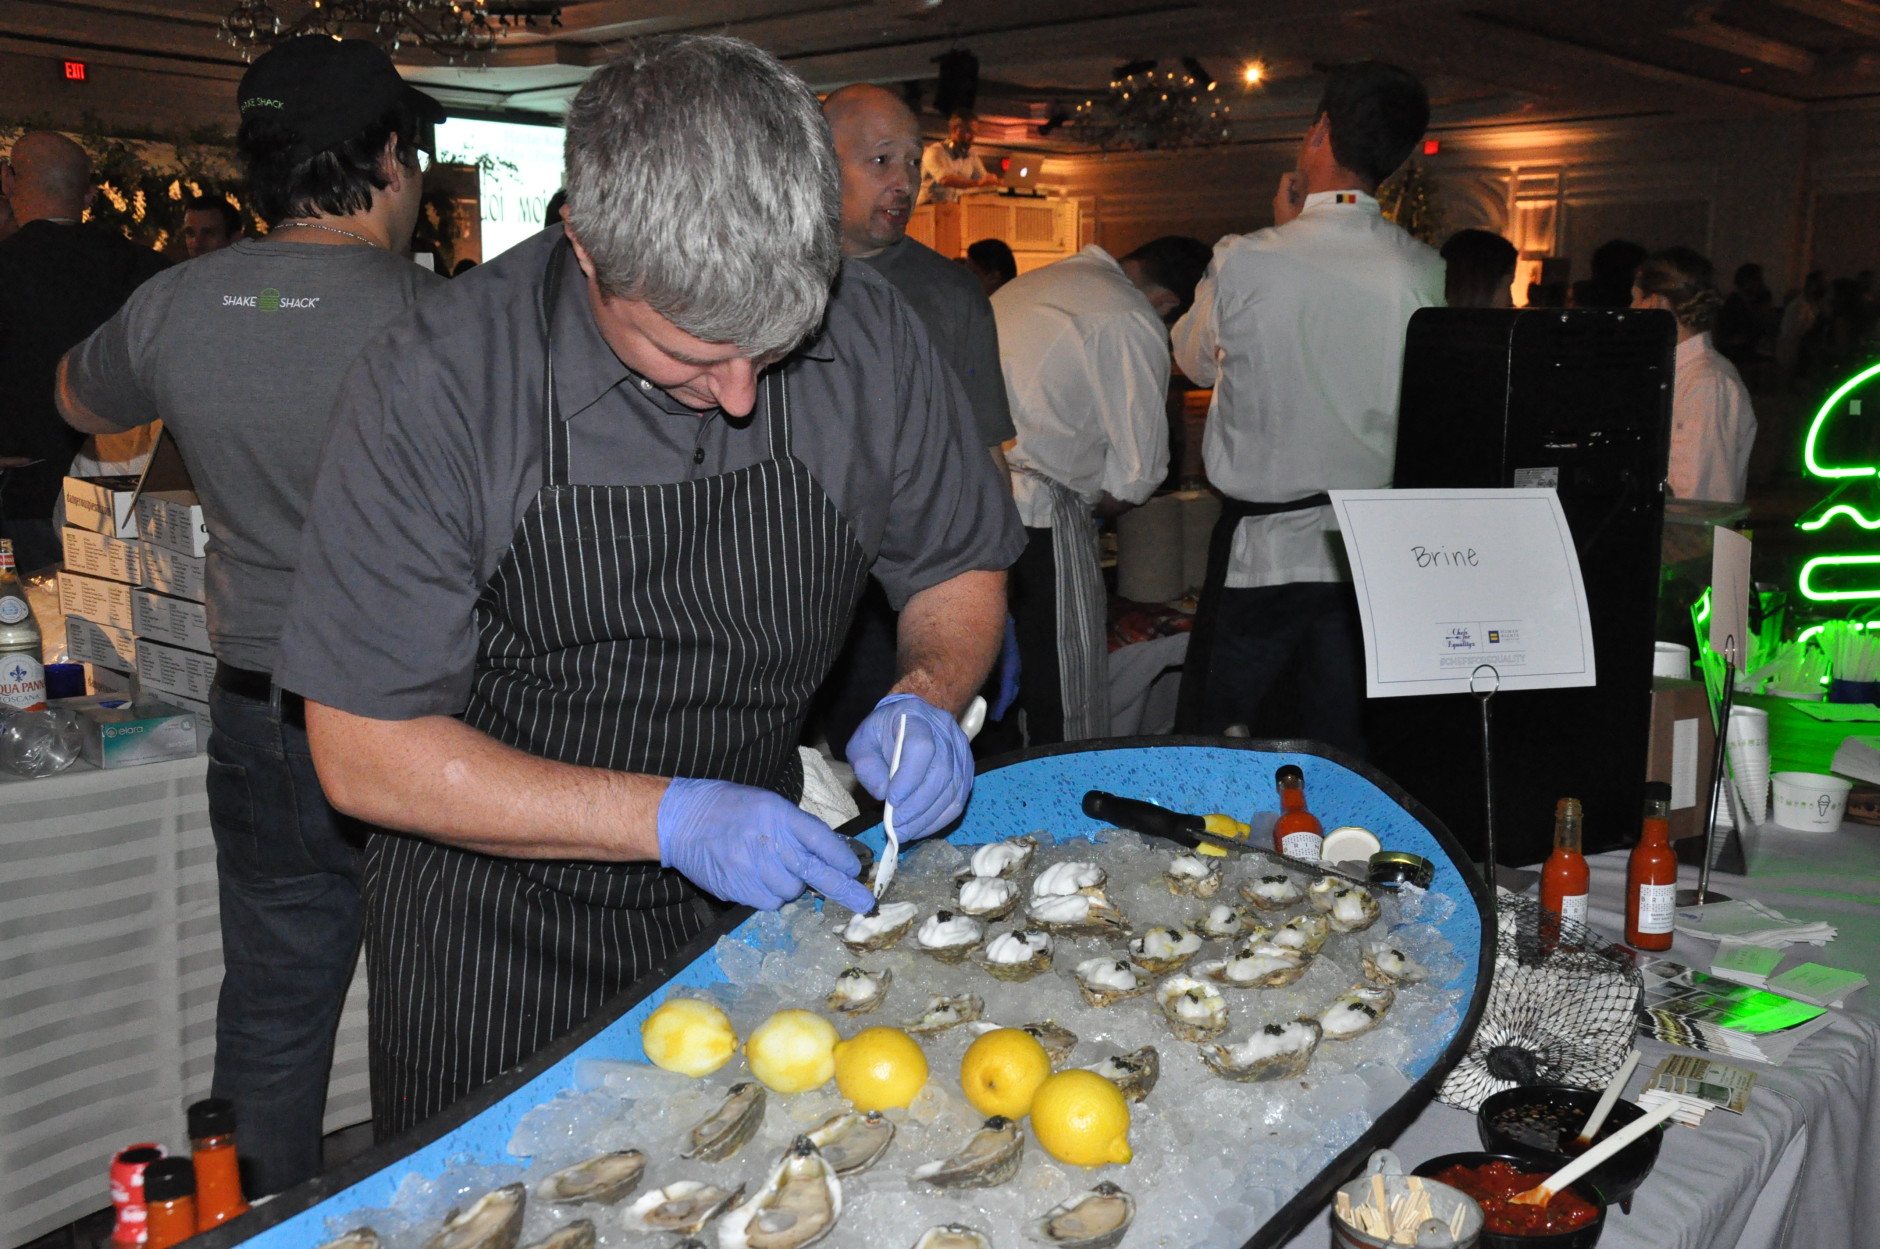 The chefs from the Mosaic District's BRINE restaurant shuck oysters for diners. (WTOP/Rachel Nania)